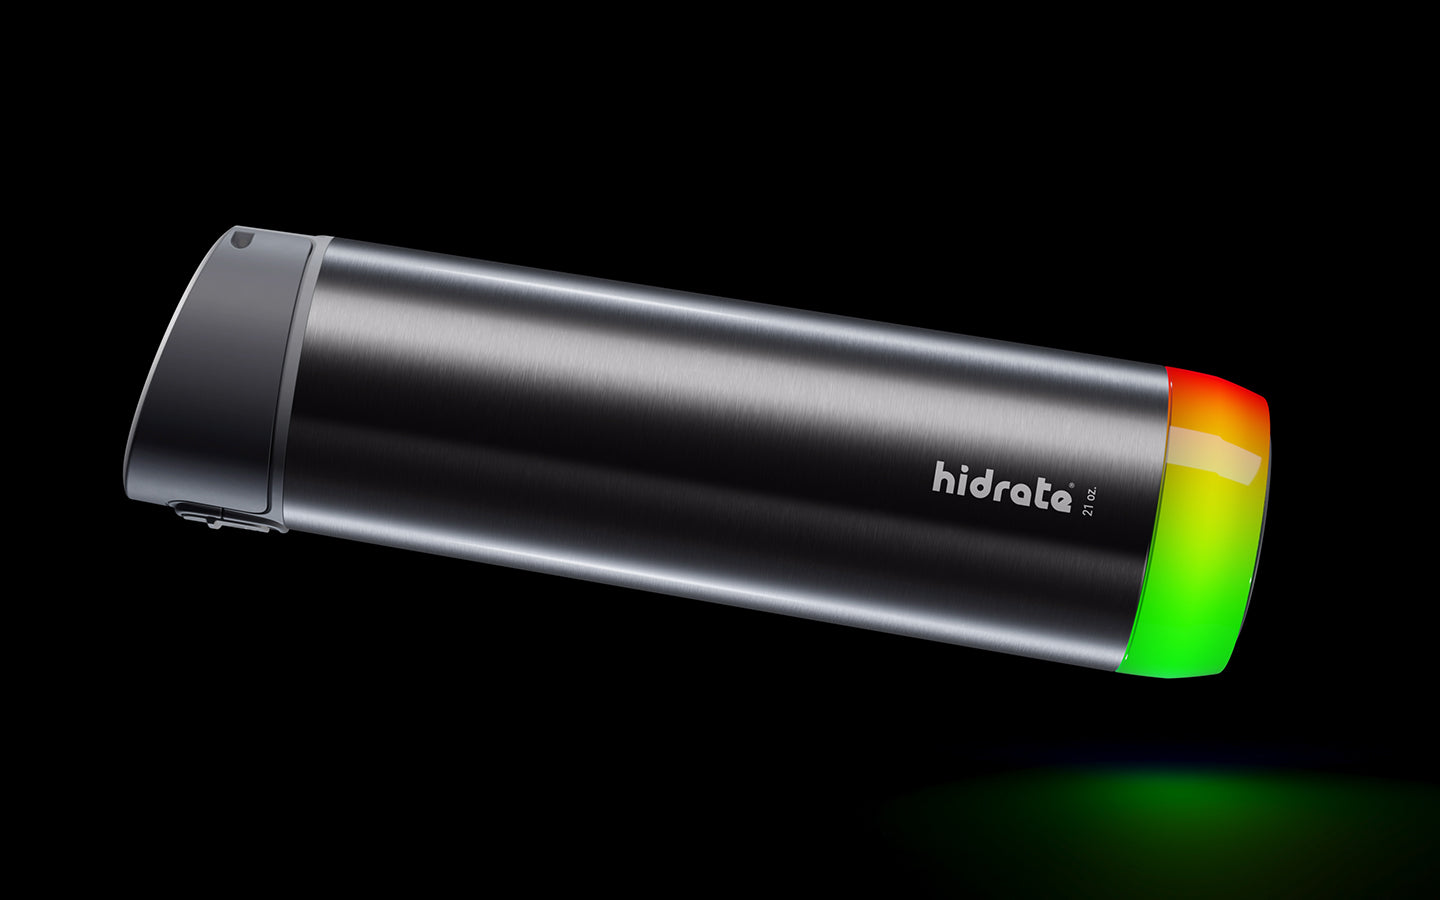 HidrateSpark PRO: The Next Wave in Hydration is Here!